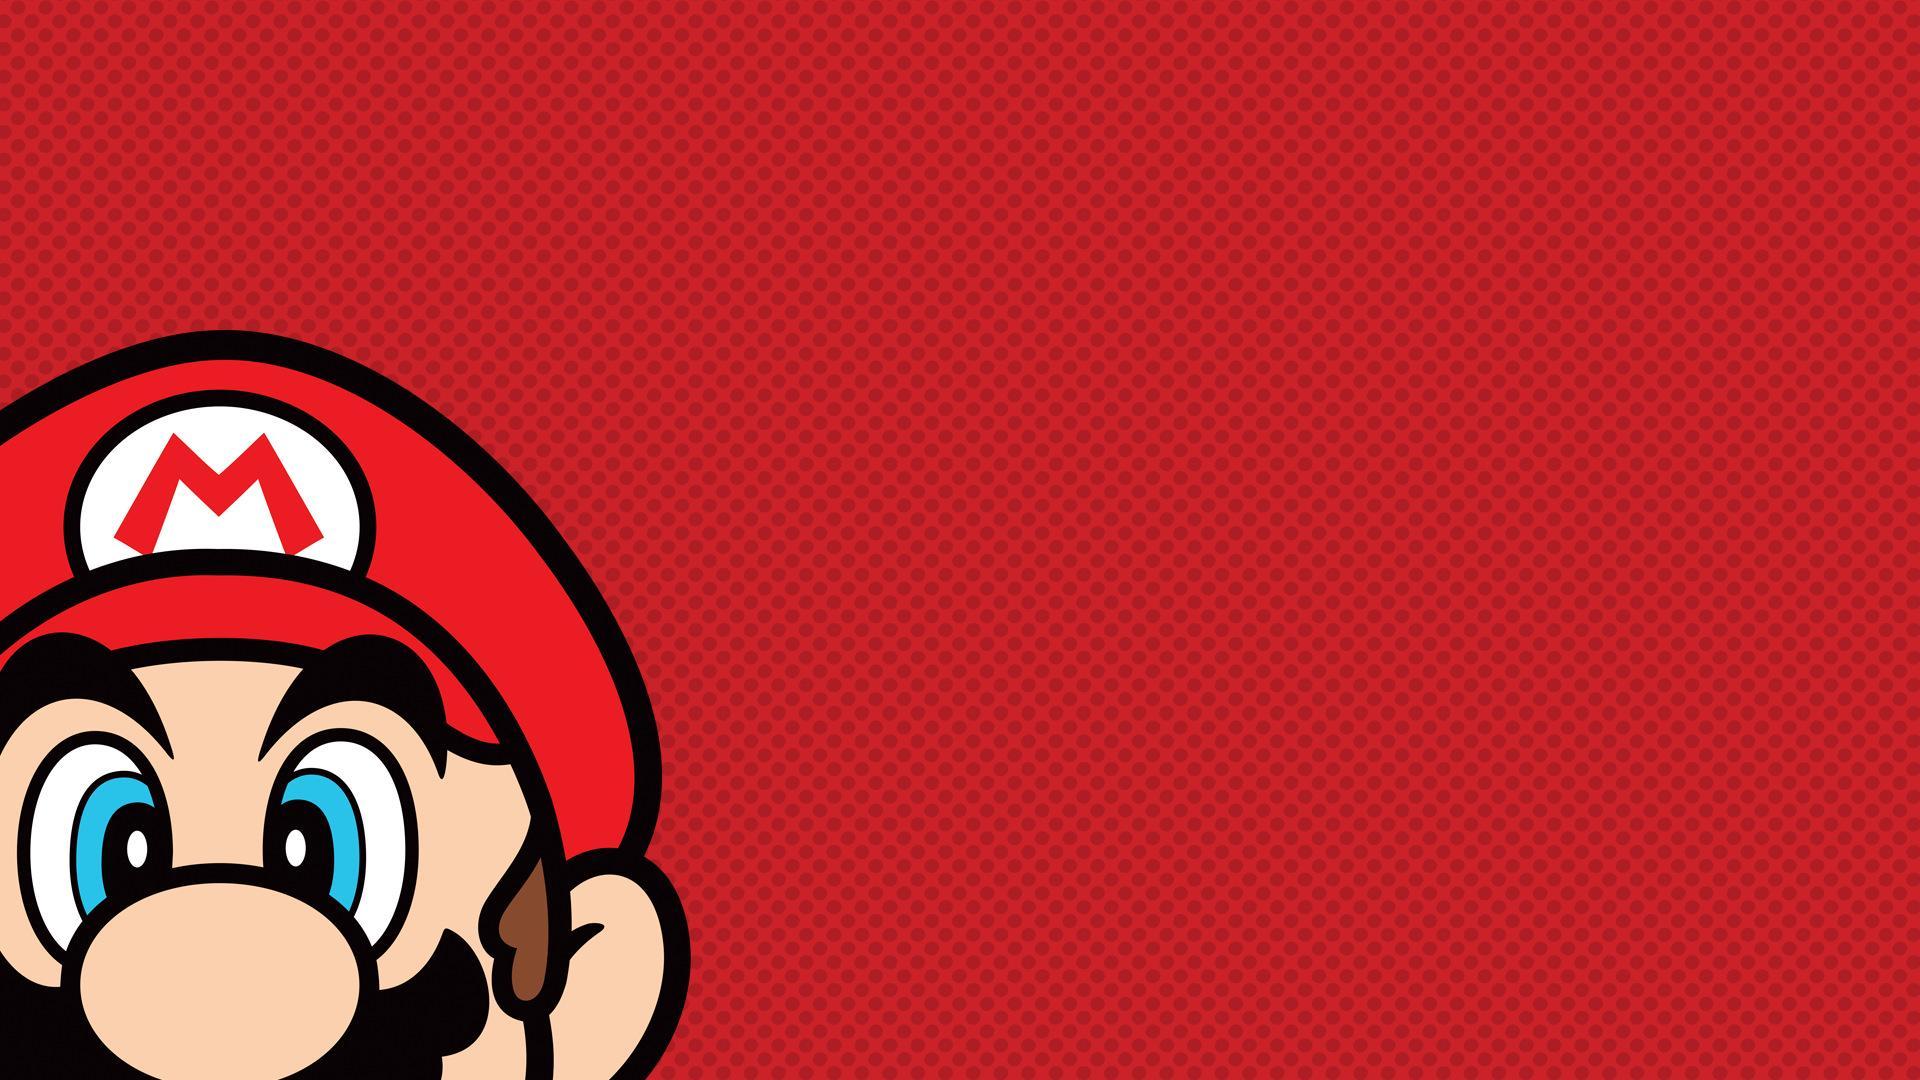 Mario Wallpapers for Android - APK Download